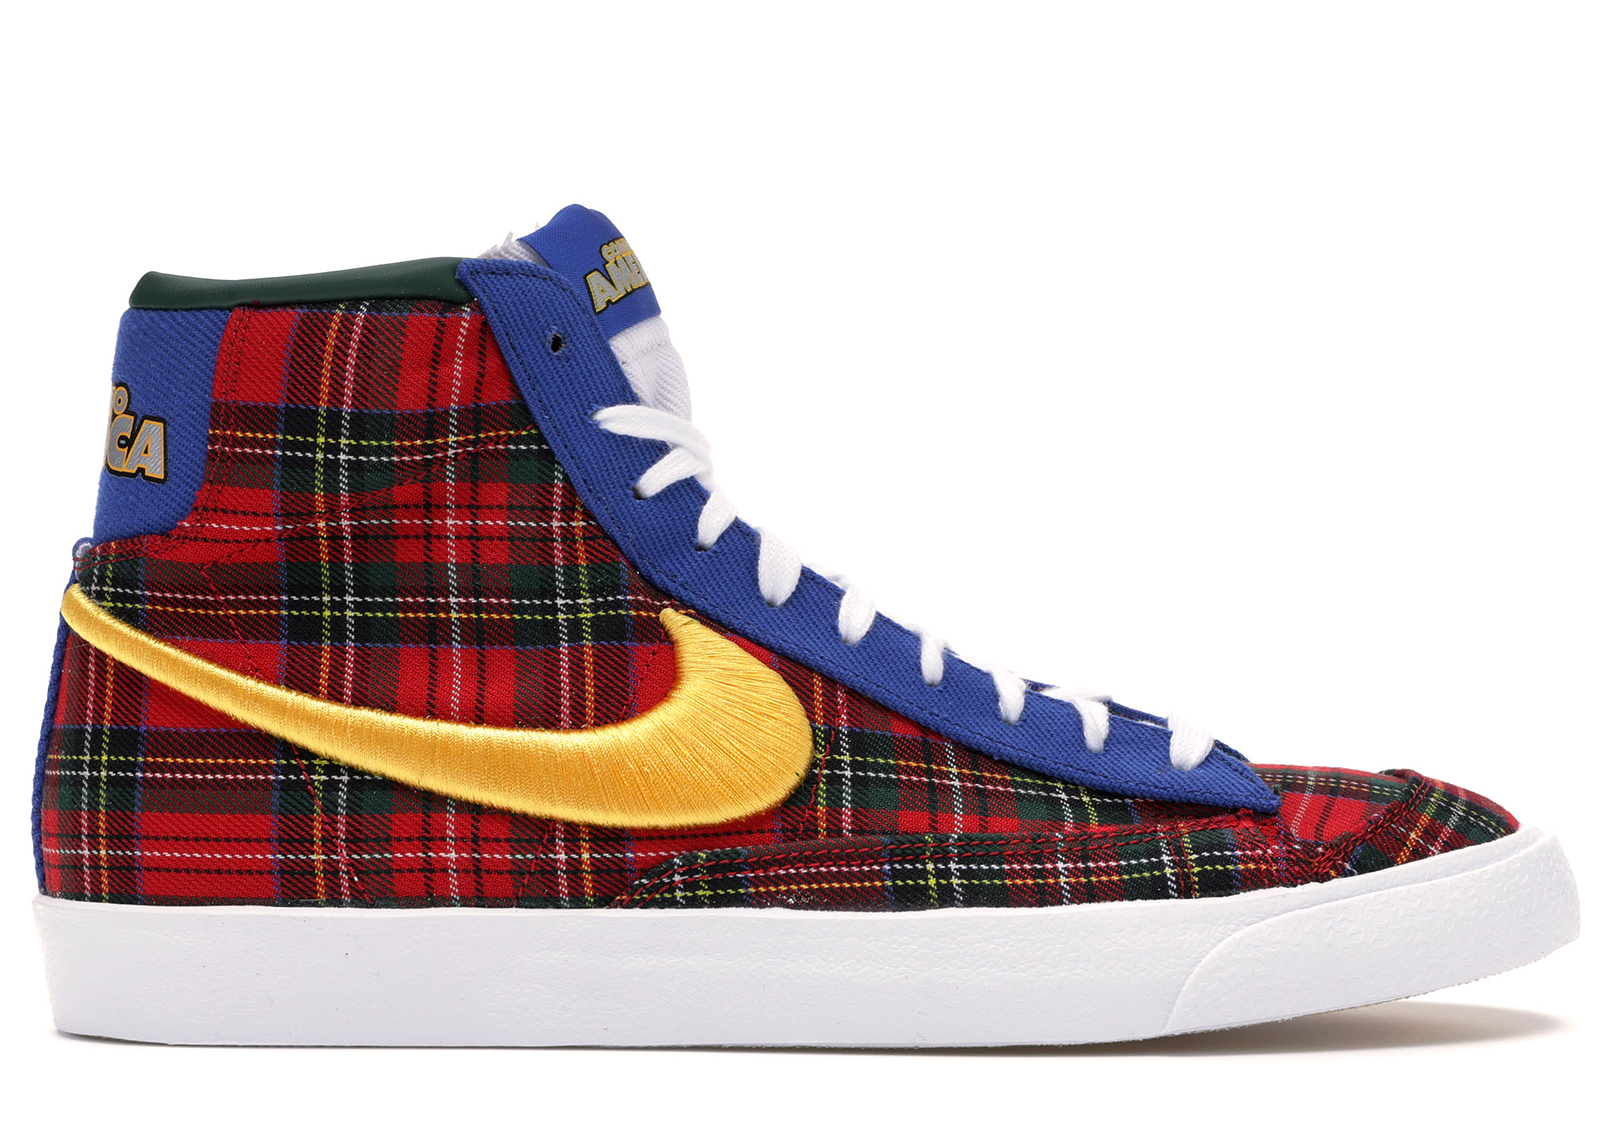 coming to america nikes